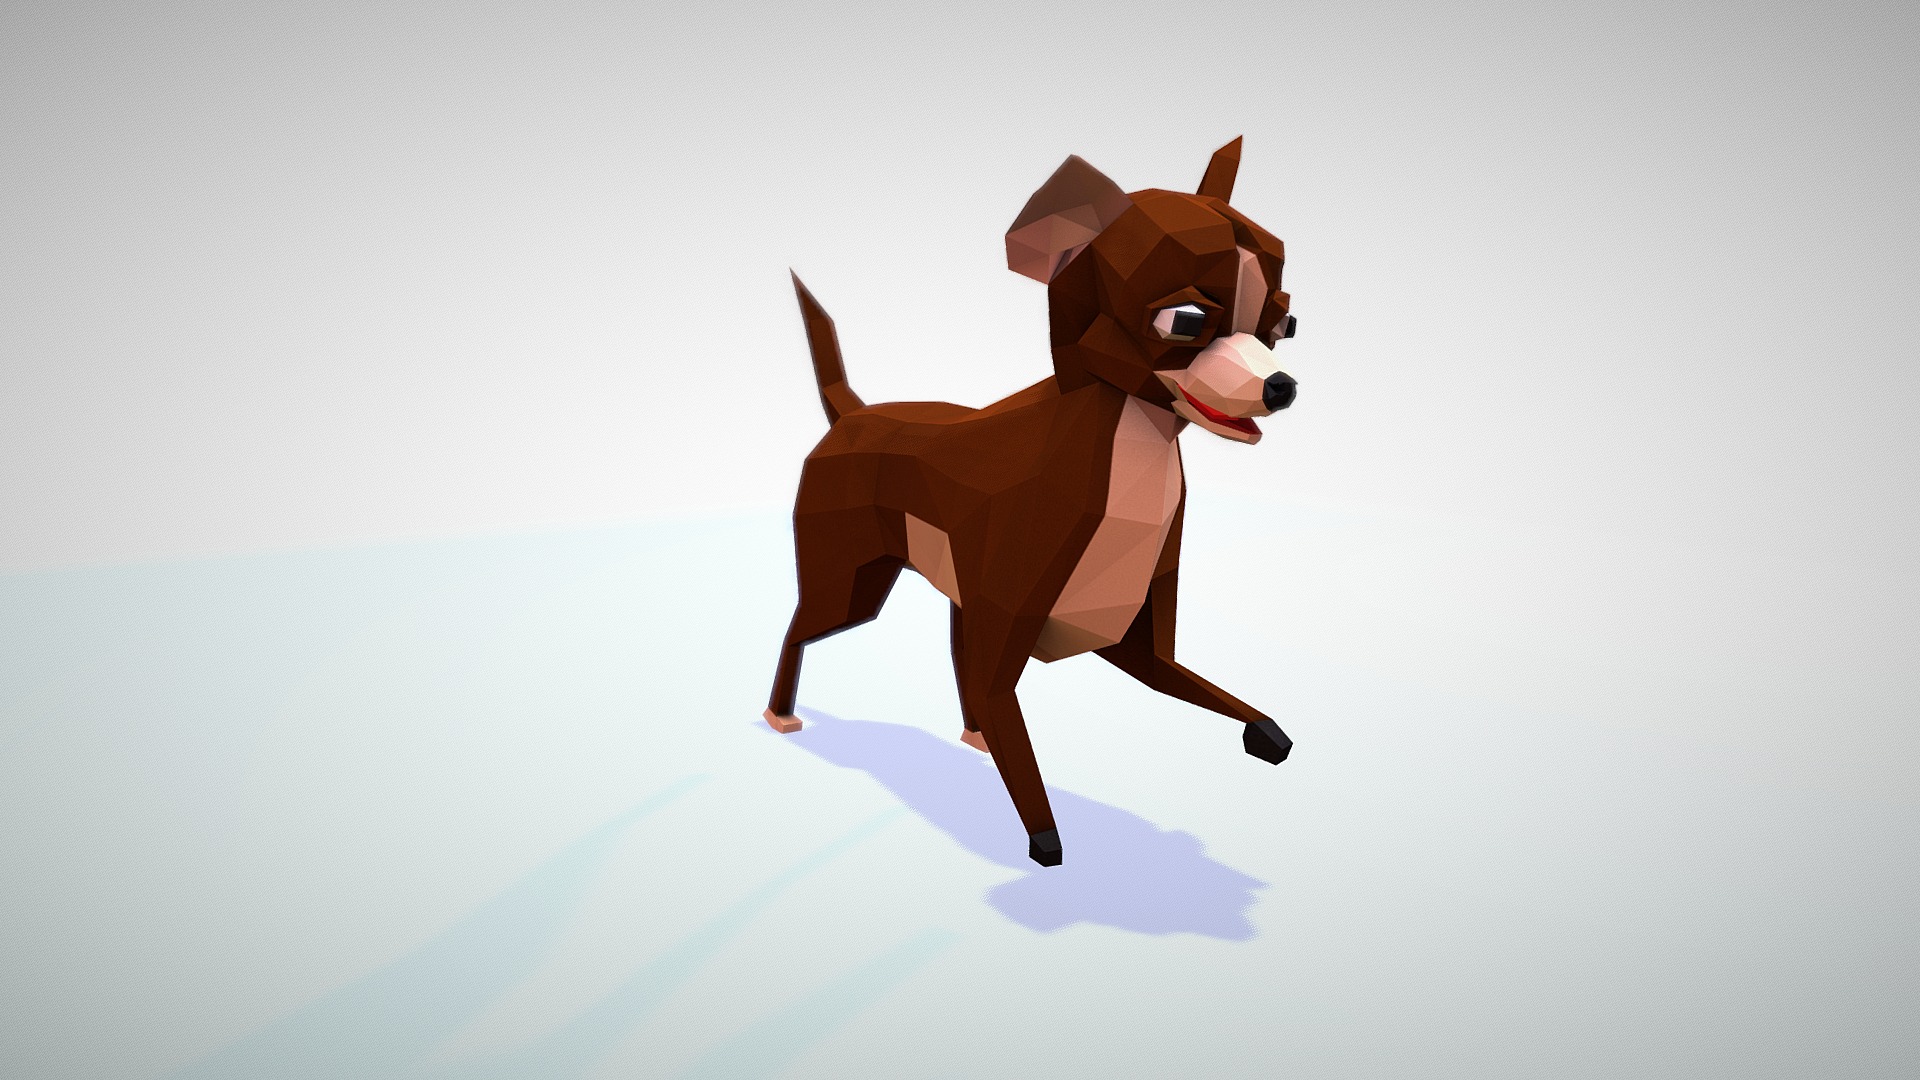 3D model Chihuahua - This is a 3D model of the Chihuahua. The 3D model is about a dog running on a white background.